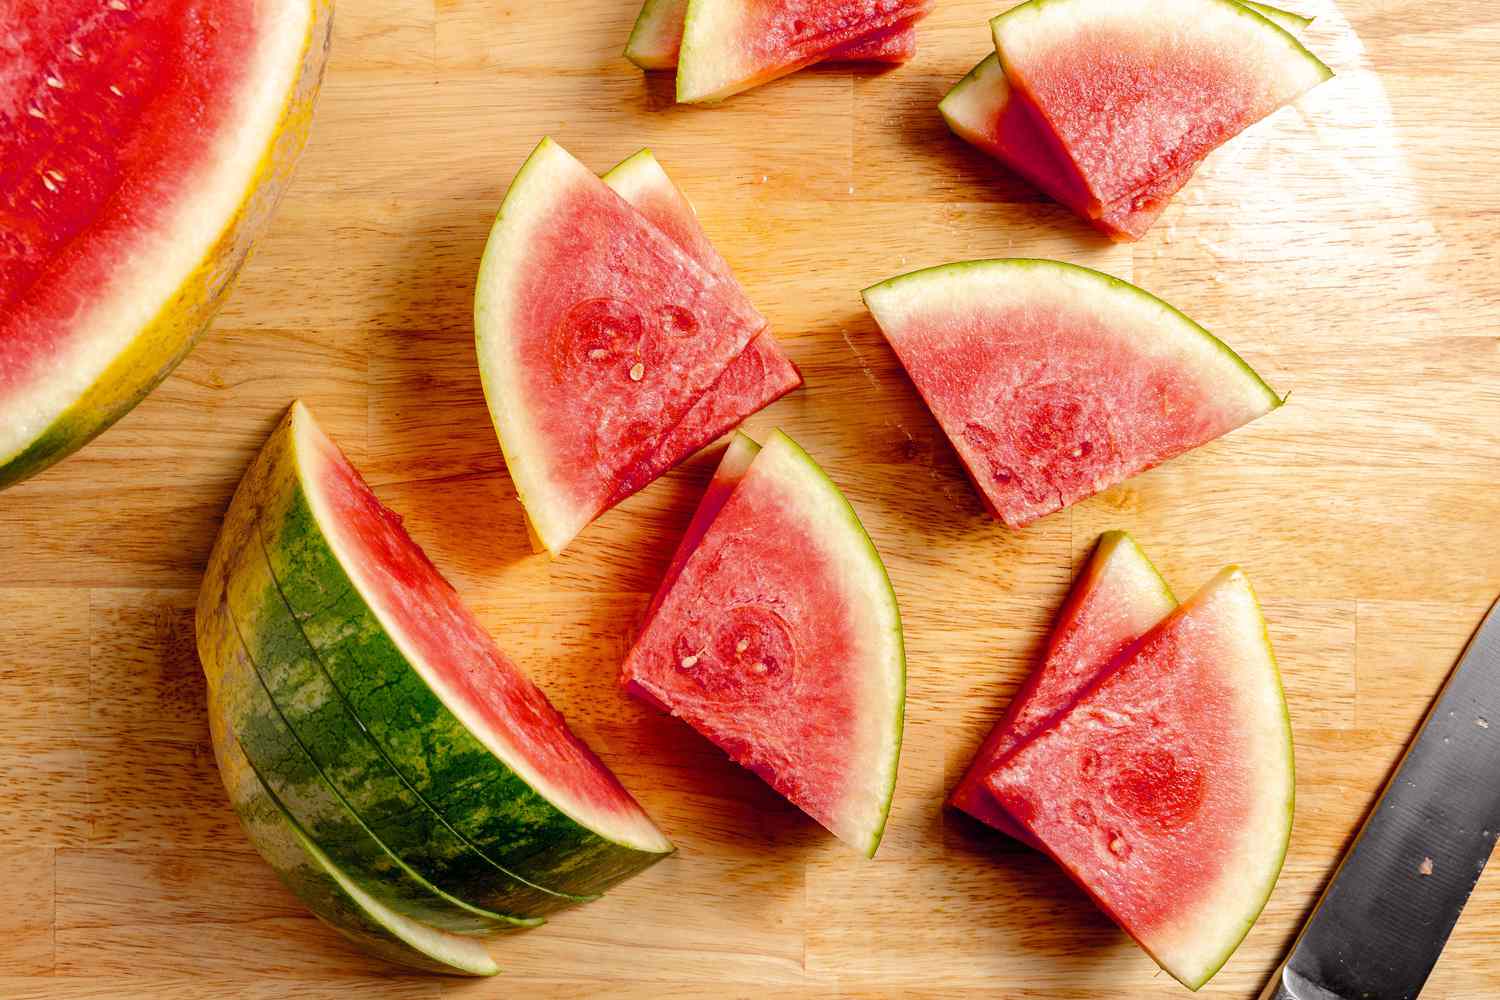 How To Store Cut Watermelon Without Fridge